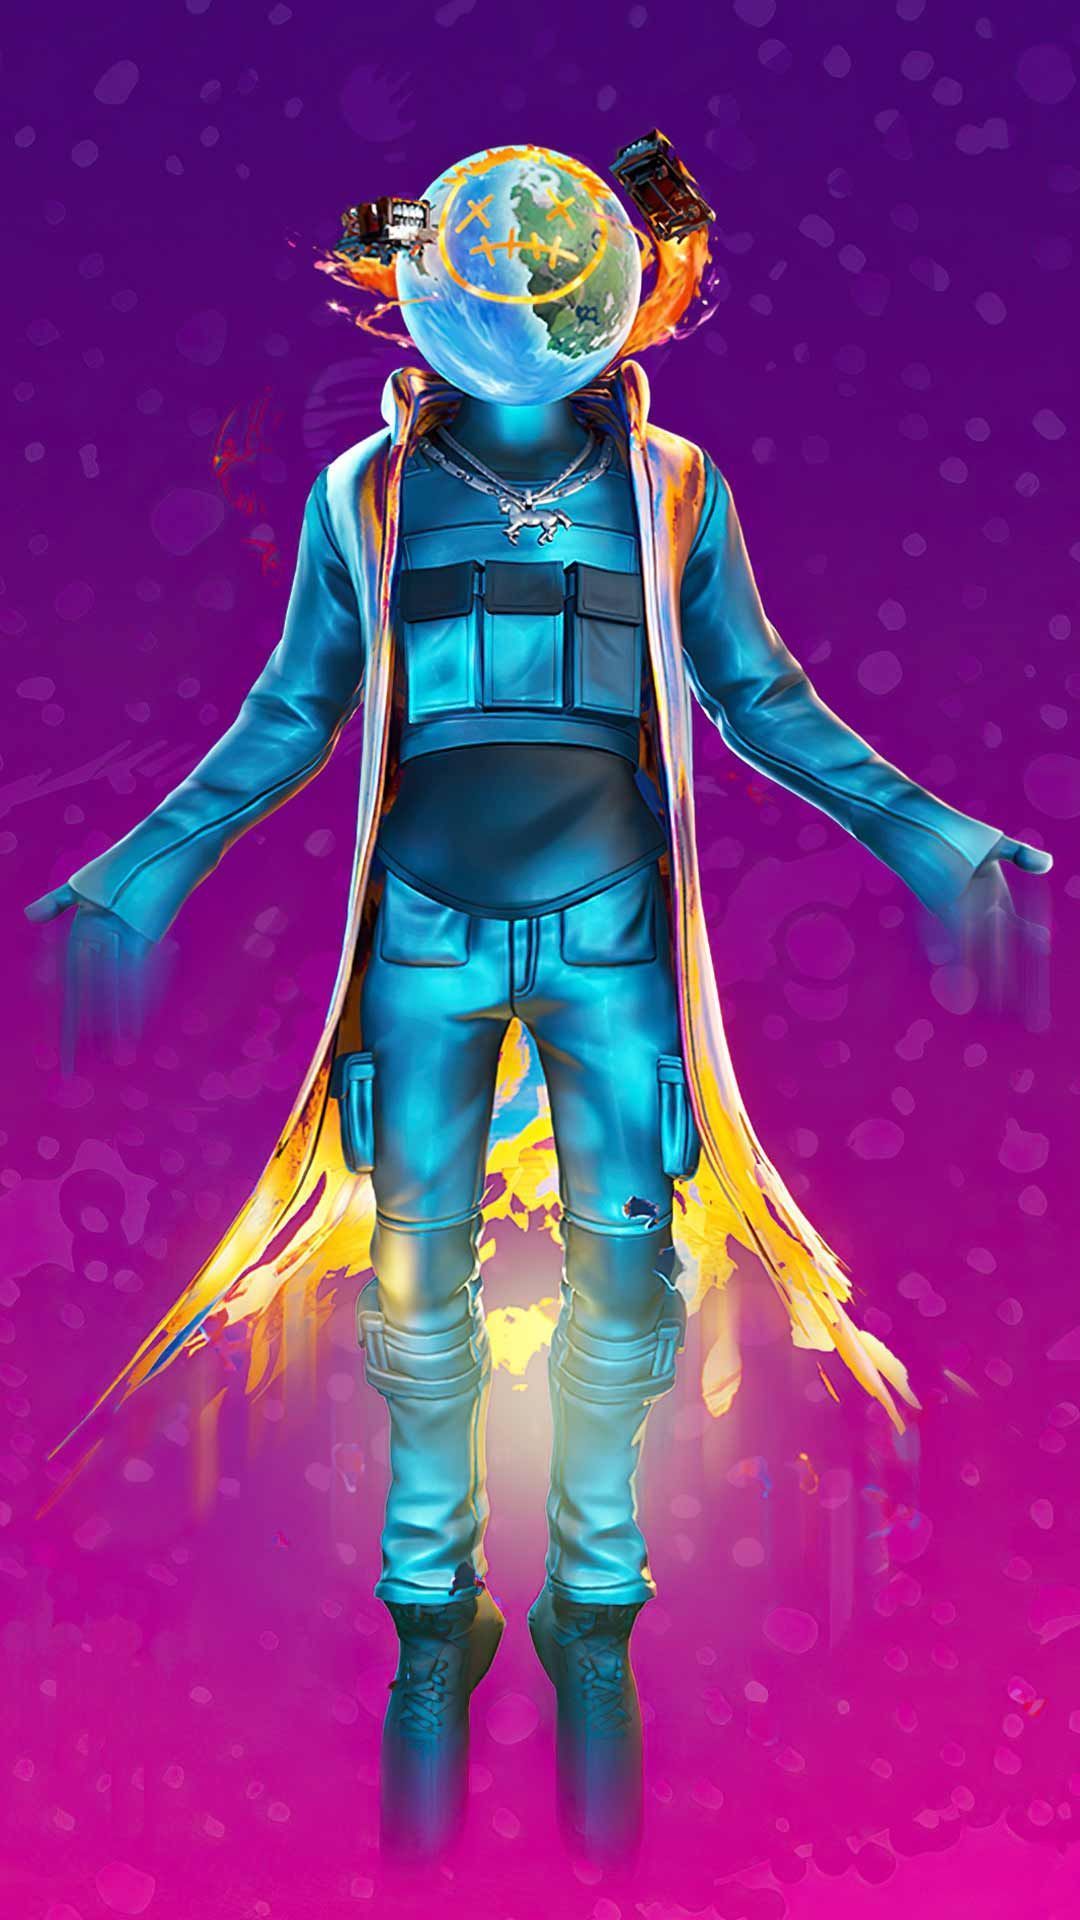 Astro jack fortnite wallpaper phone background for free download on android mobile to add as cellphone loc. Aztec wallpaper, Phone background, Vs pink wallpaper